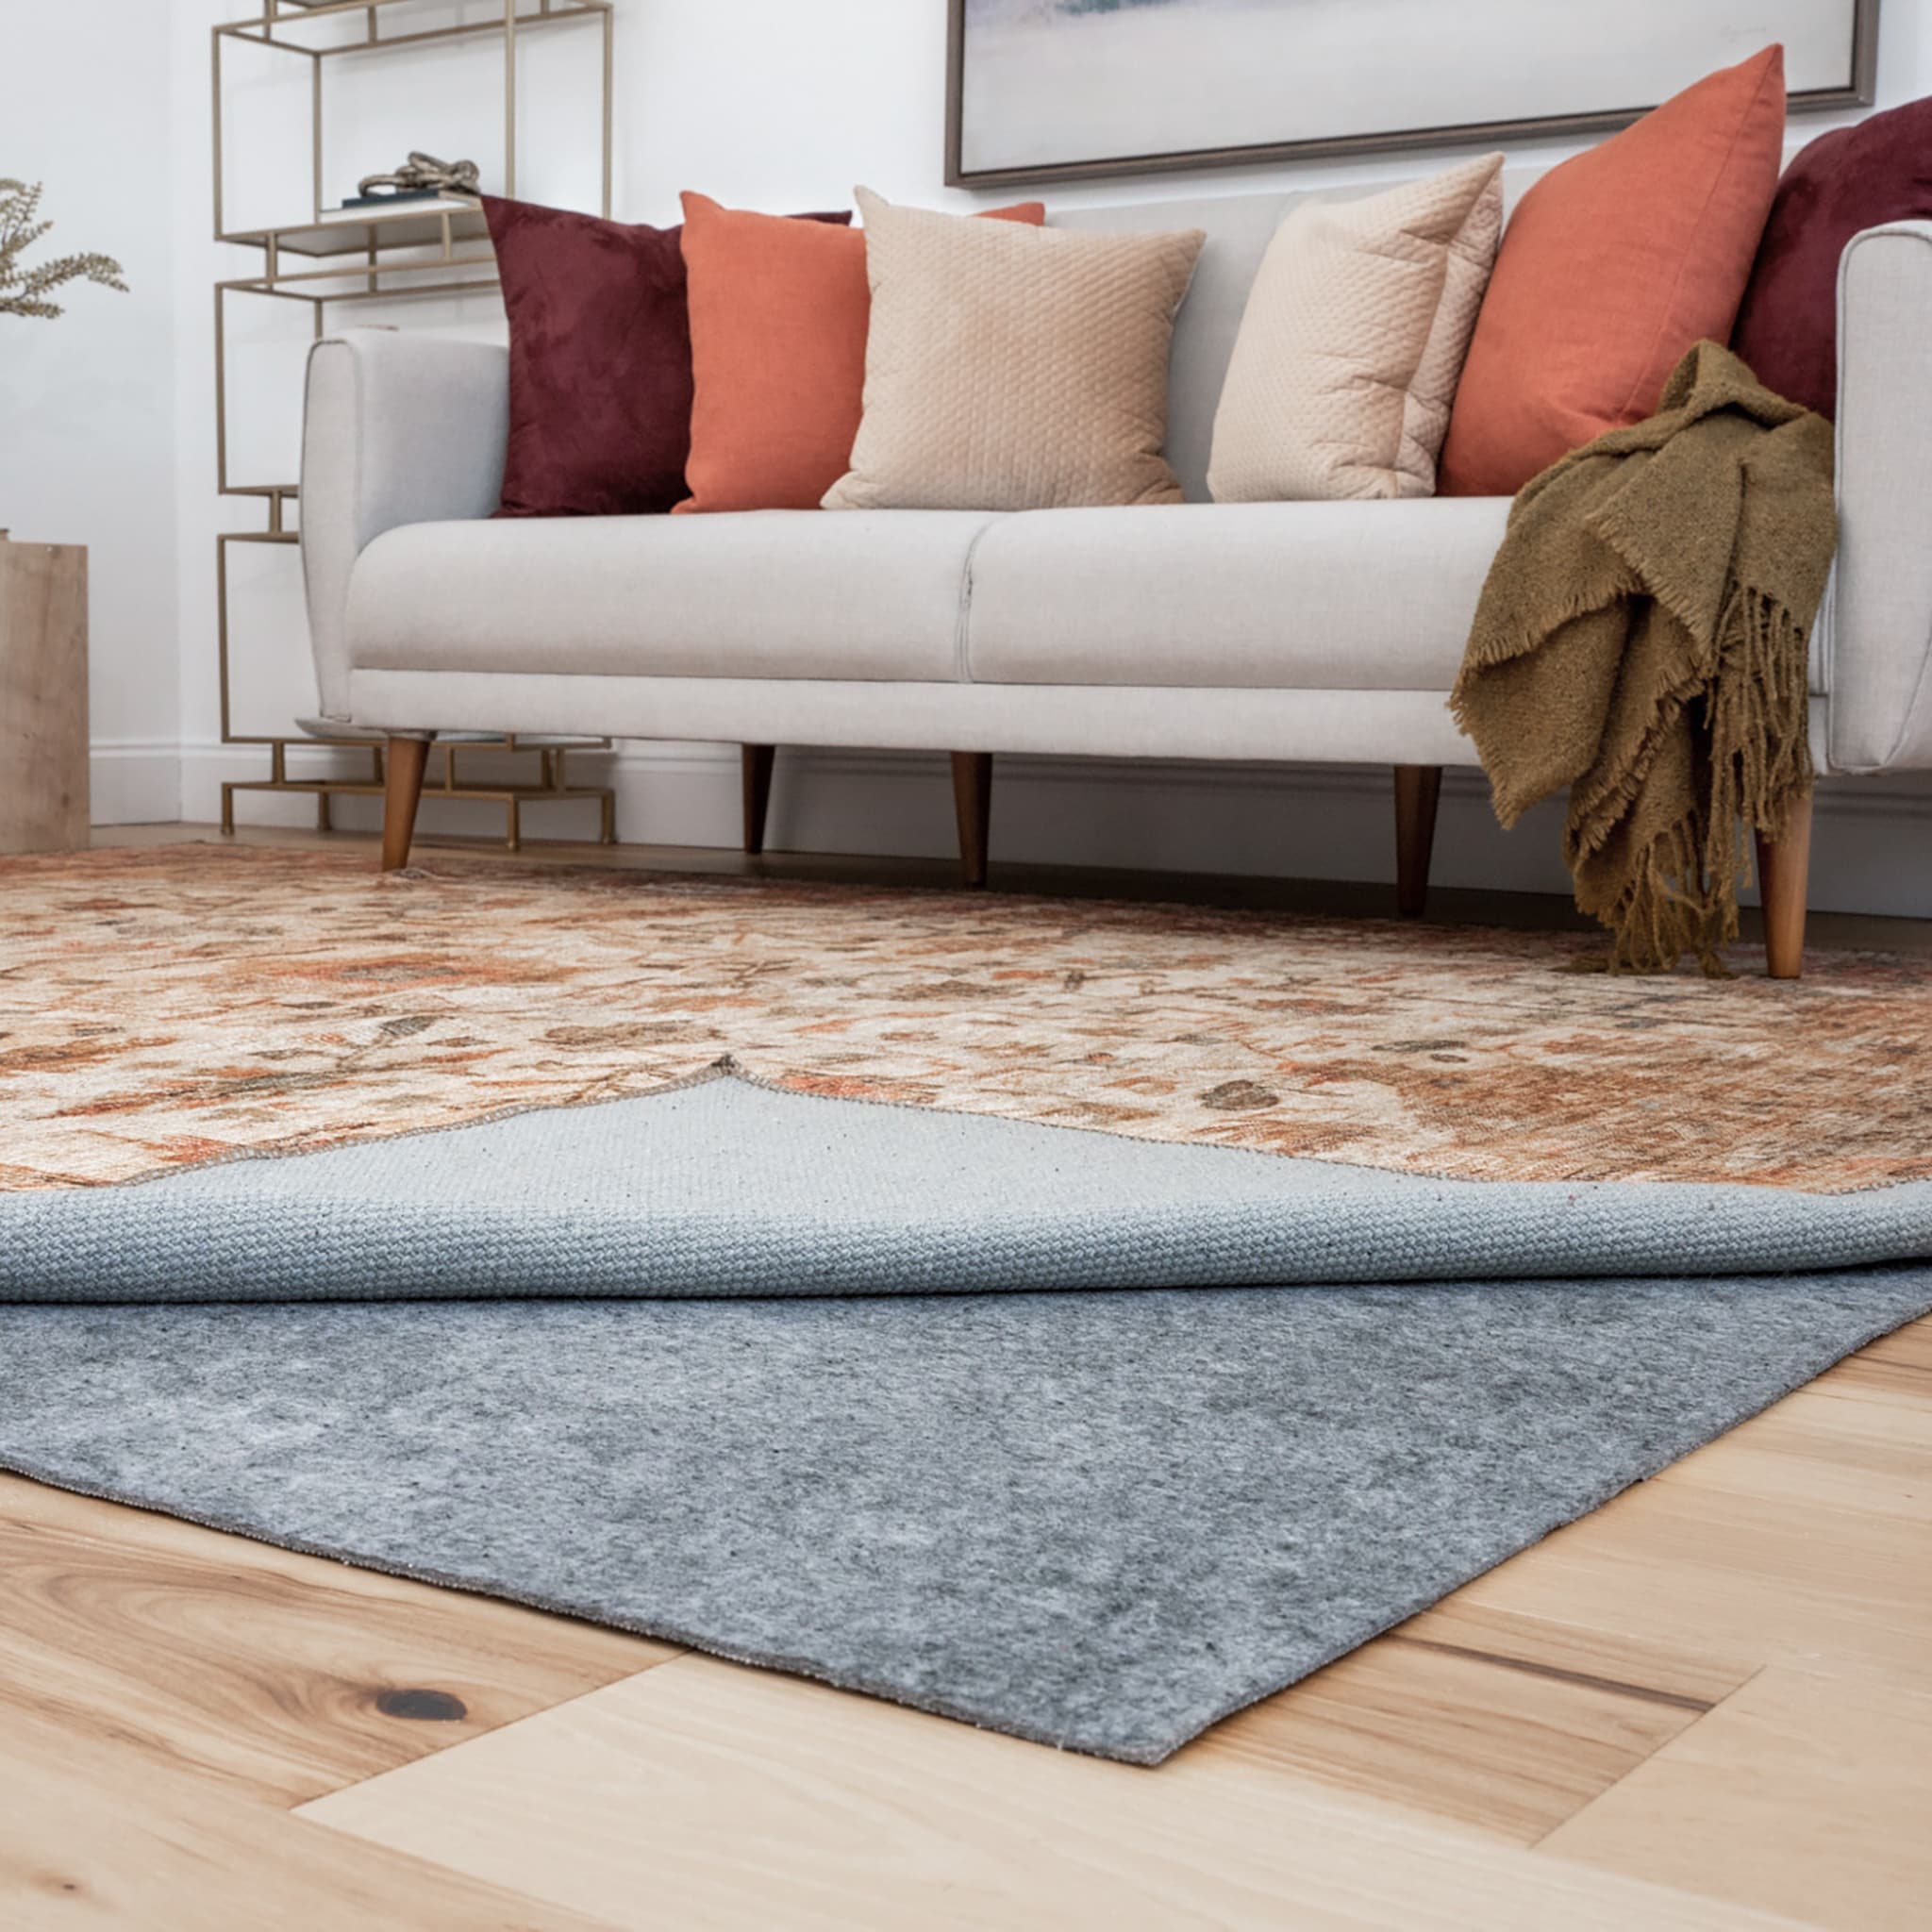 https://ak1.ostkcdn.com/images/products/is/images/direct/a7f4d3269249d070c76a3928860225c4dc77a668/Posh-Grip-Felt-Solid-Non-Slip-Rug-Pad.jpg